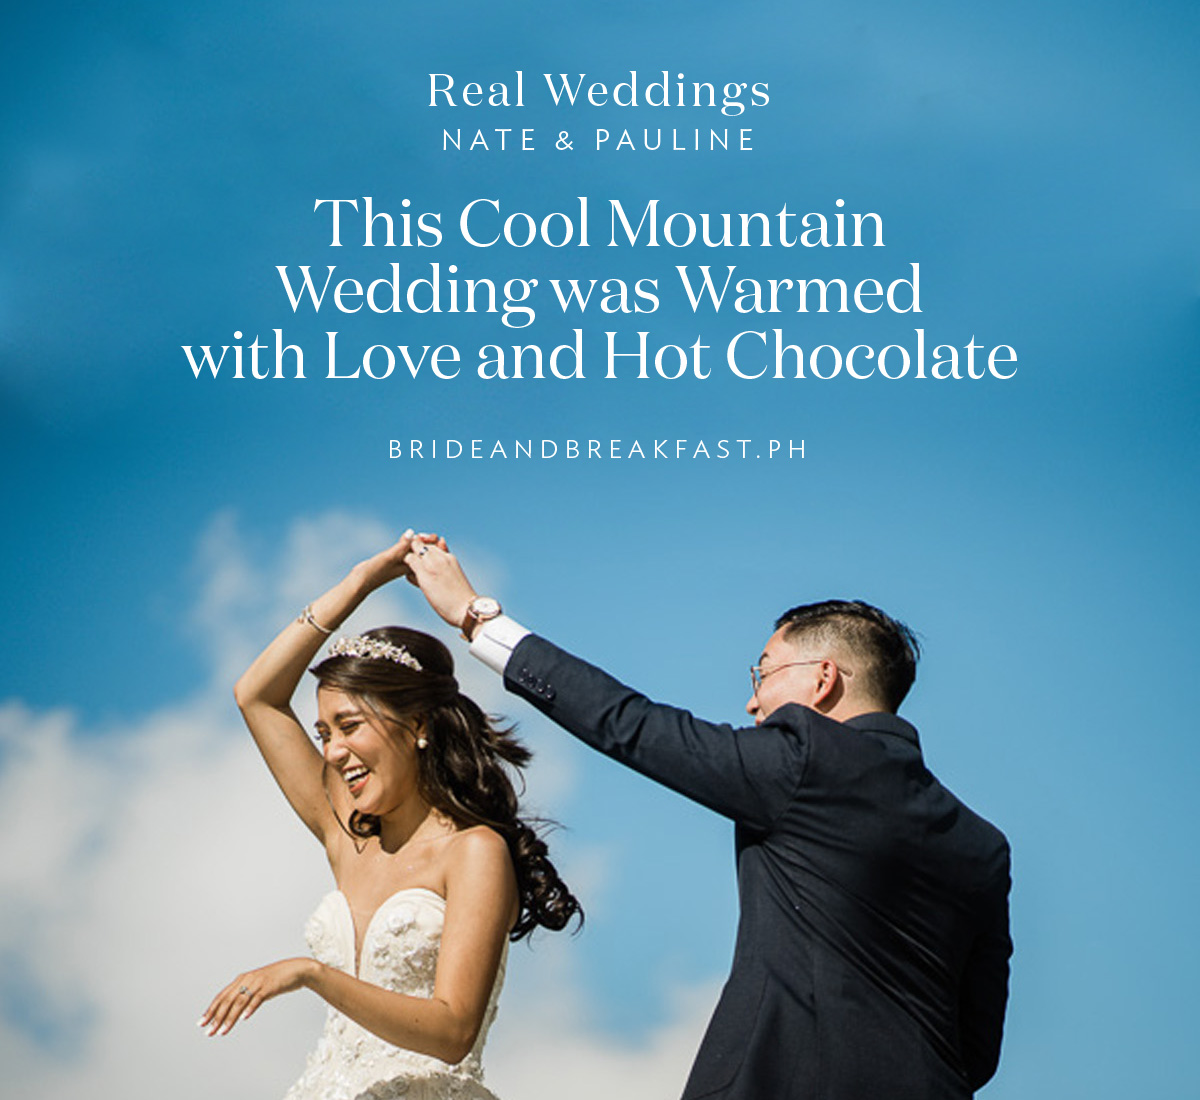 This Cool Mountain Wedding was Warmed with Love and Hot Chocolate